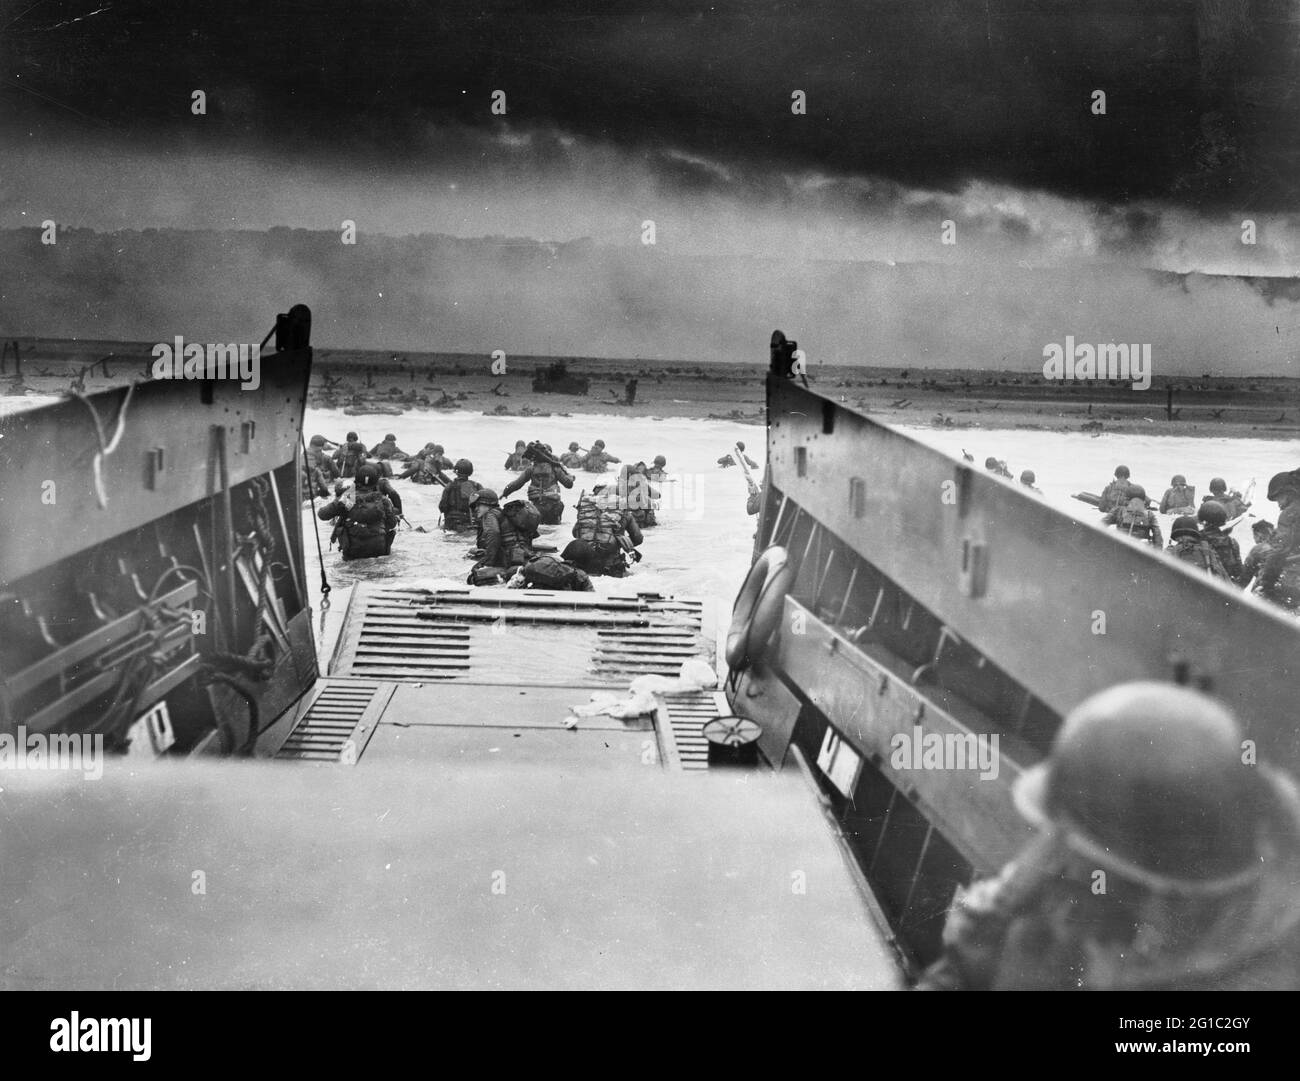 American soldiers wading from Coast Guard landing barge toward the beach at Normandy on D-Day, June 6, 1944. Sargent, Robert F., 1923-2012, photographer. Stock Photo